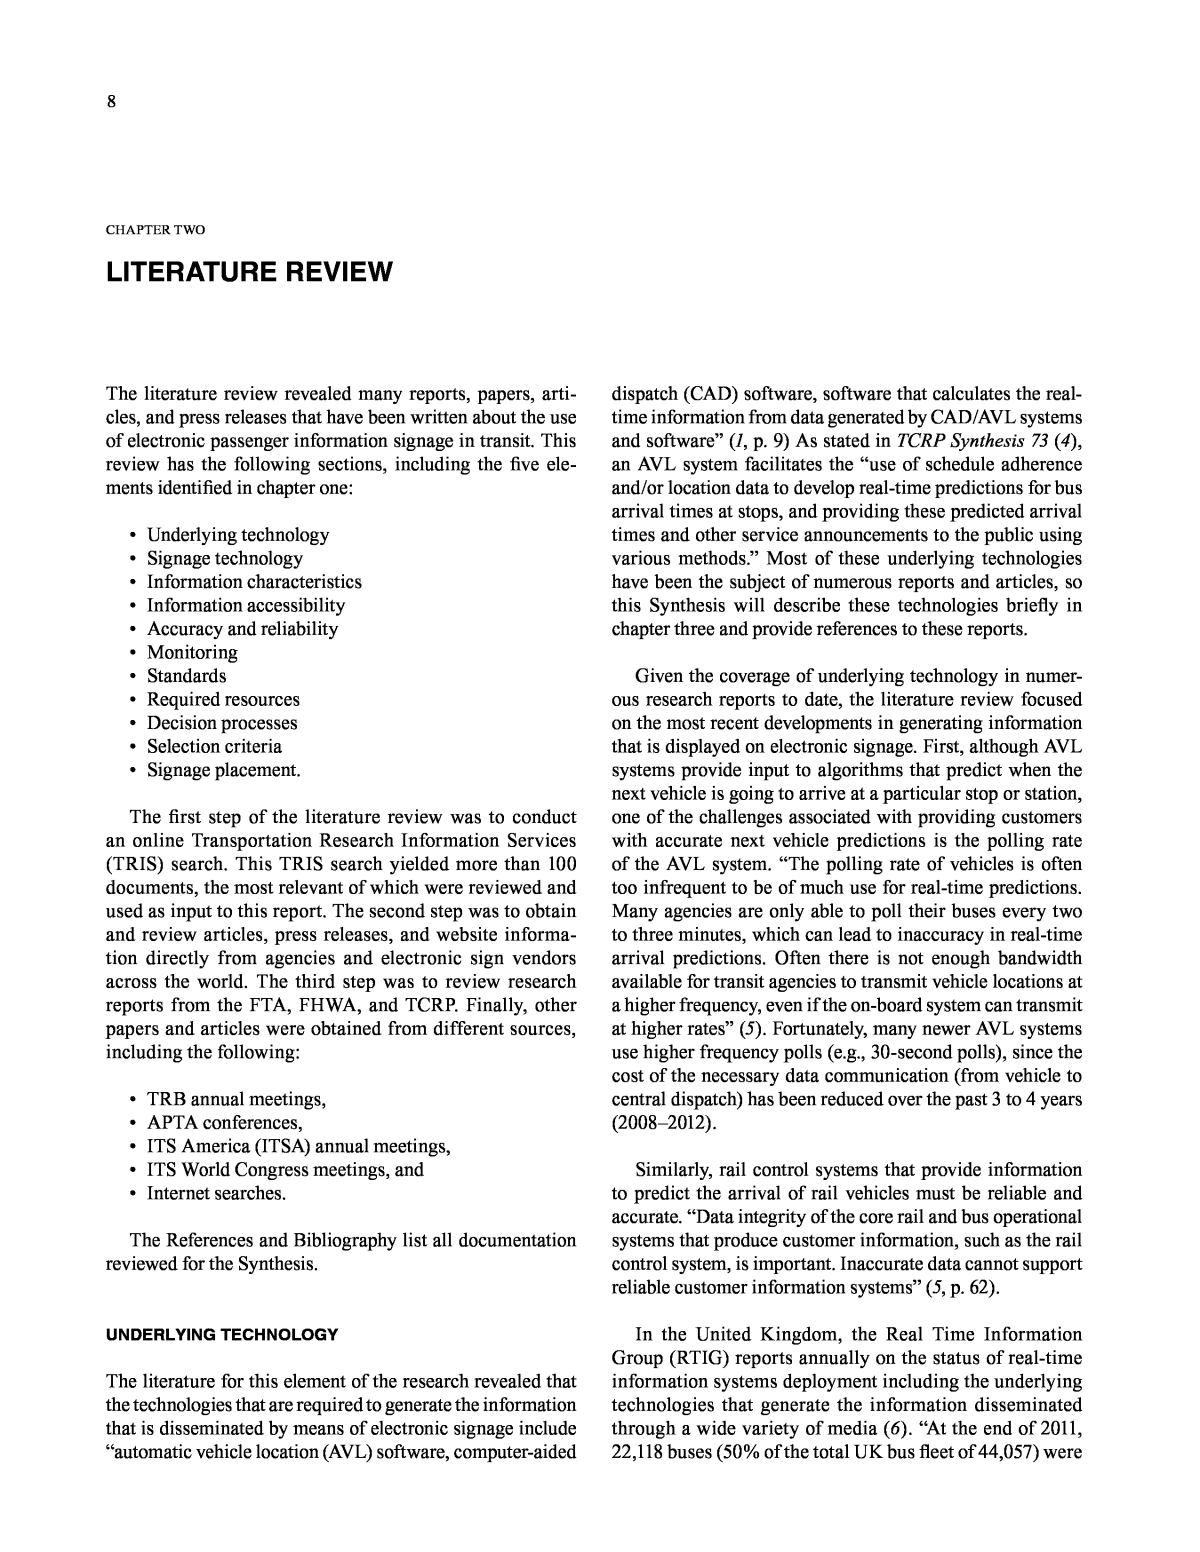 what literature review